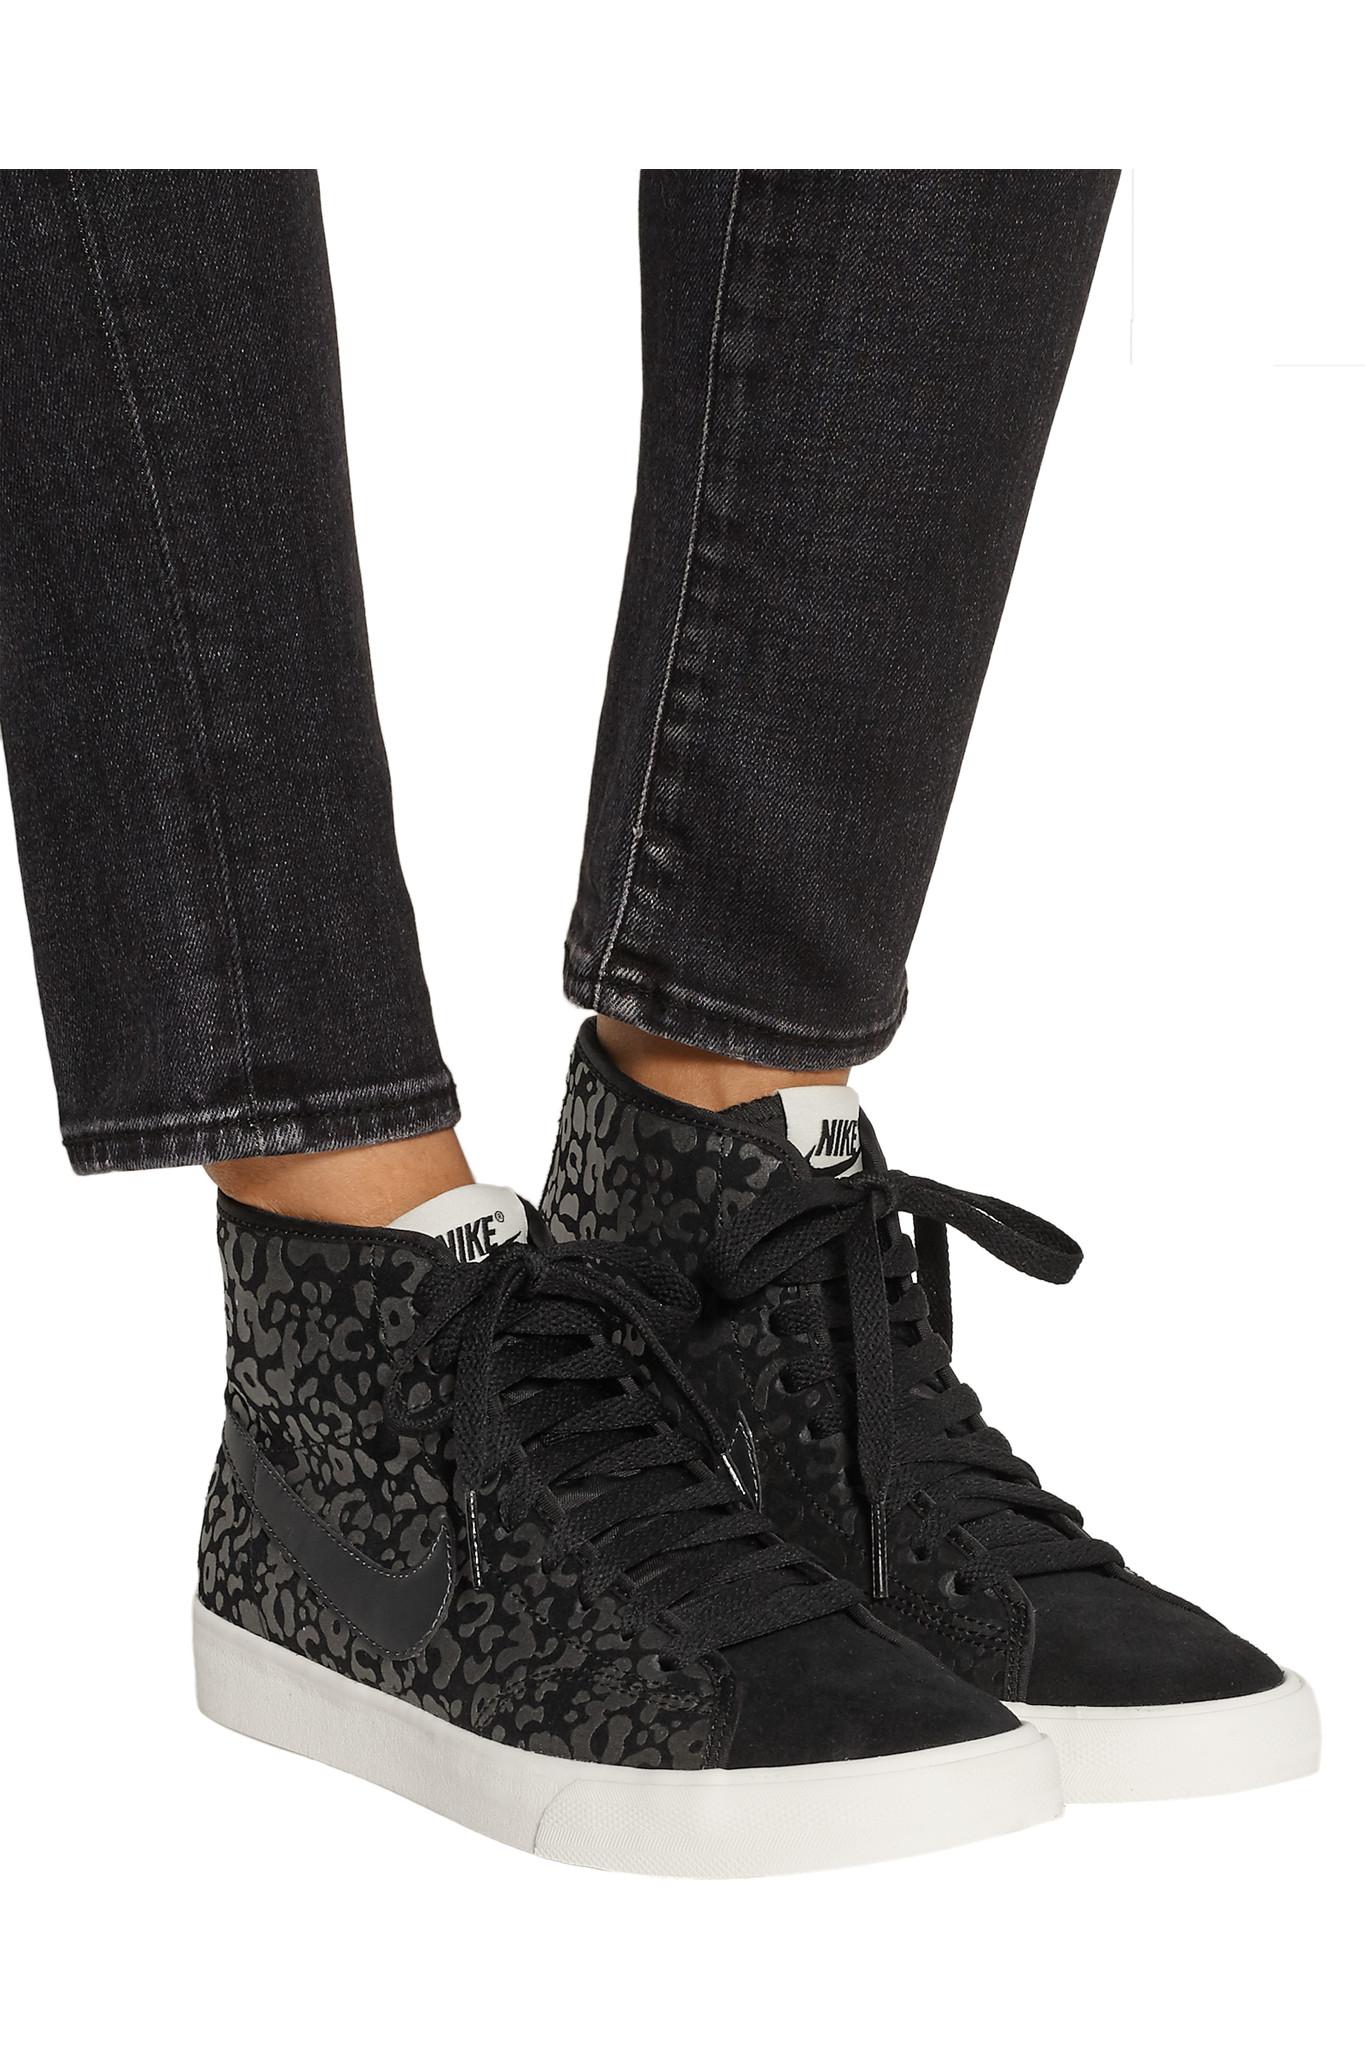 amenazar Fragua Maestro Nike Primo Court Leopard-print Suede High-top Sneakers in Black | Lyst